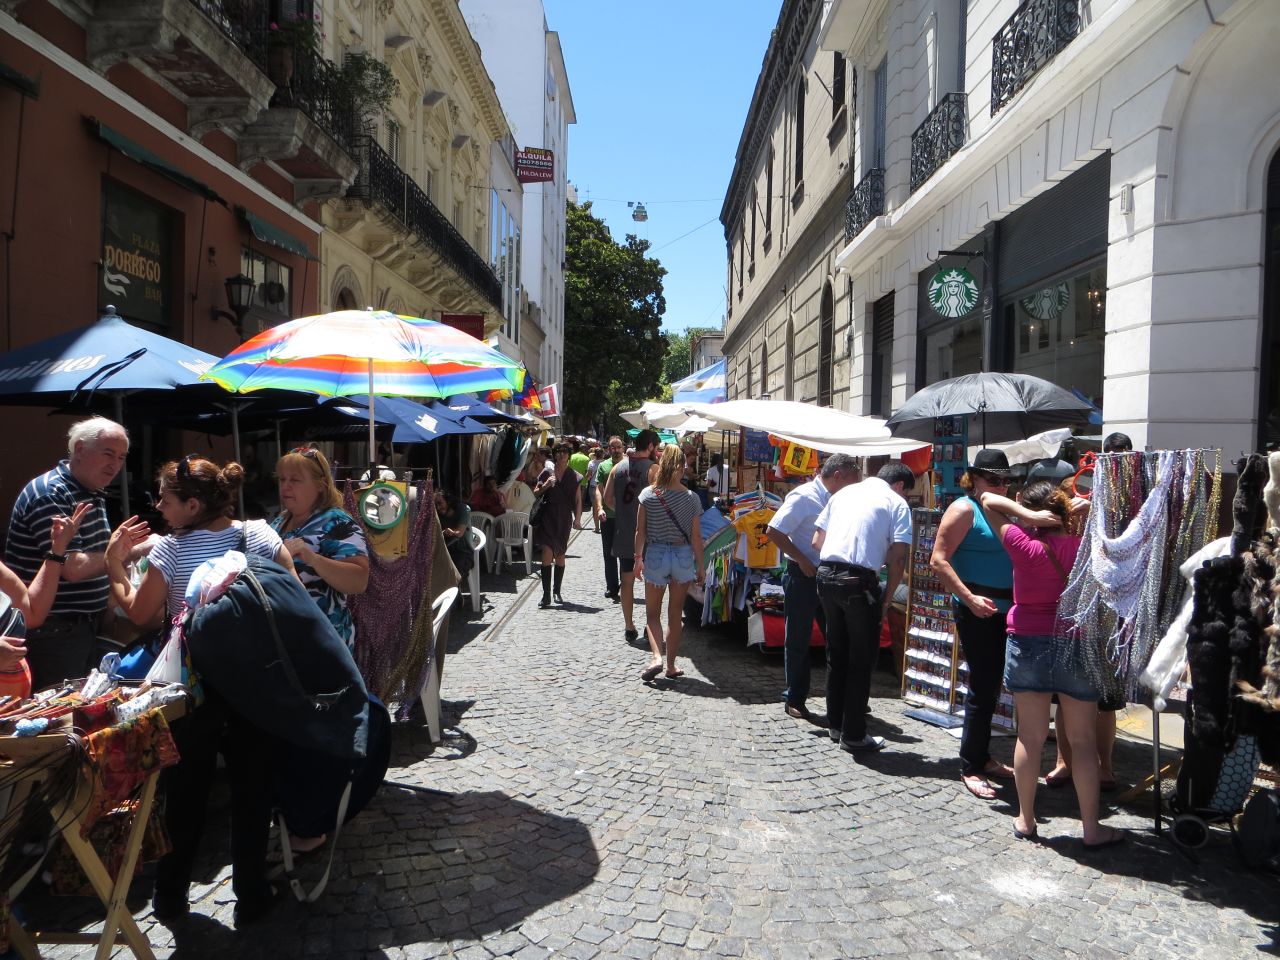 A Sunday market in Buenos Aires. The city has many cafes, and the culture is such that people take time to sit down for coffee, says psychologist Albert Brok. Starbucks has also made its way there. 